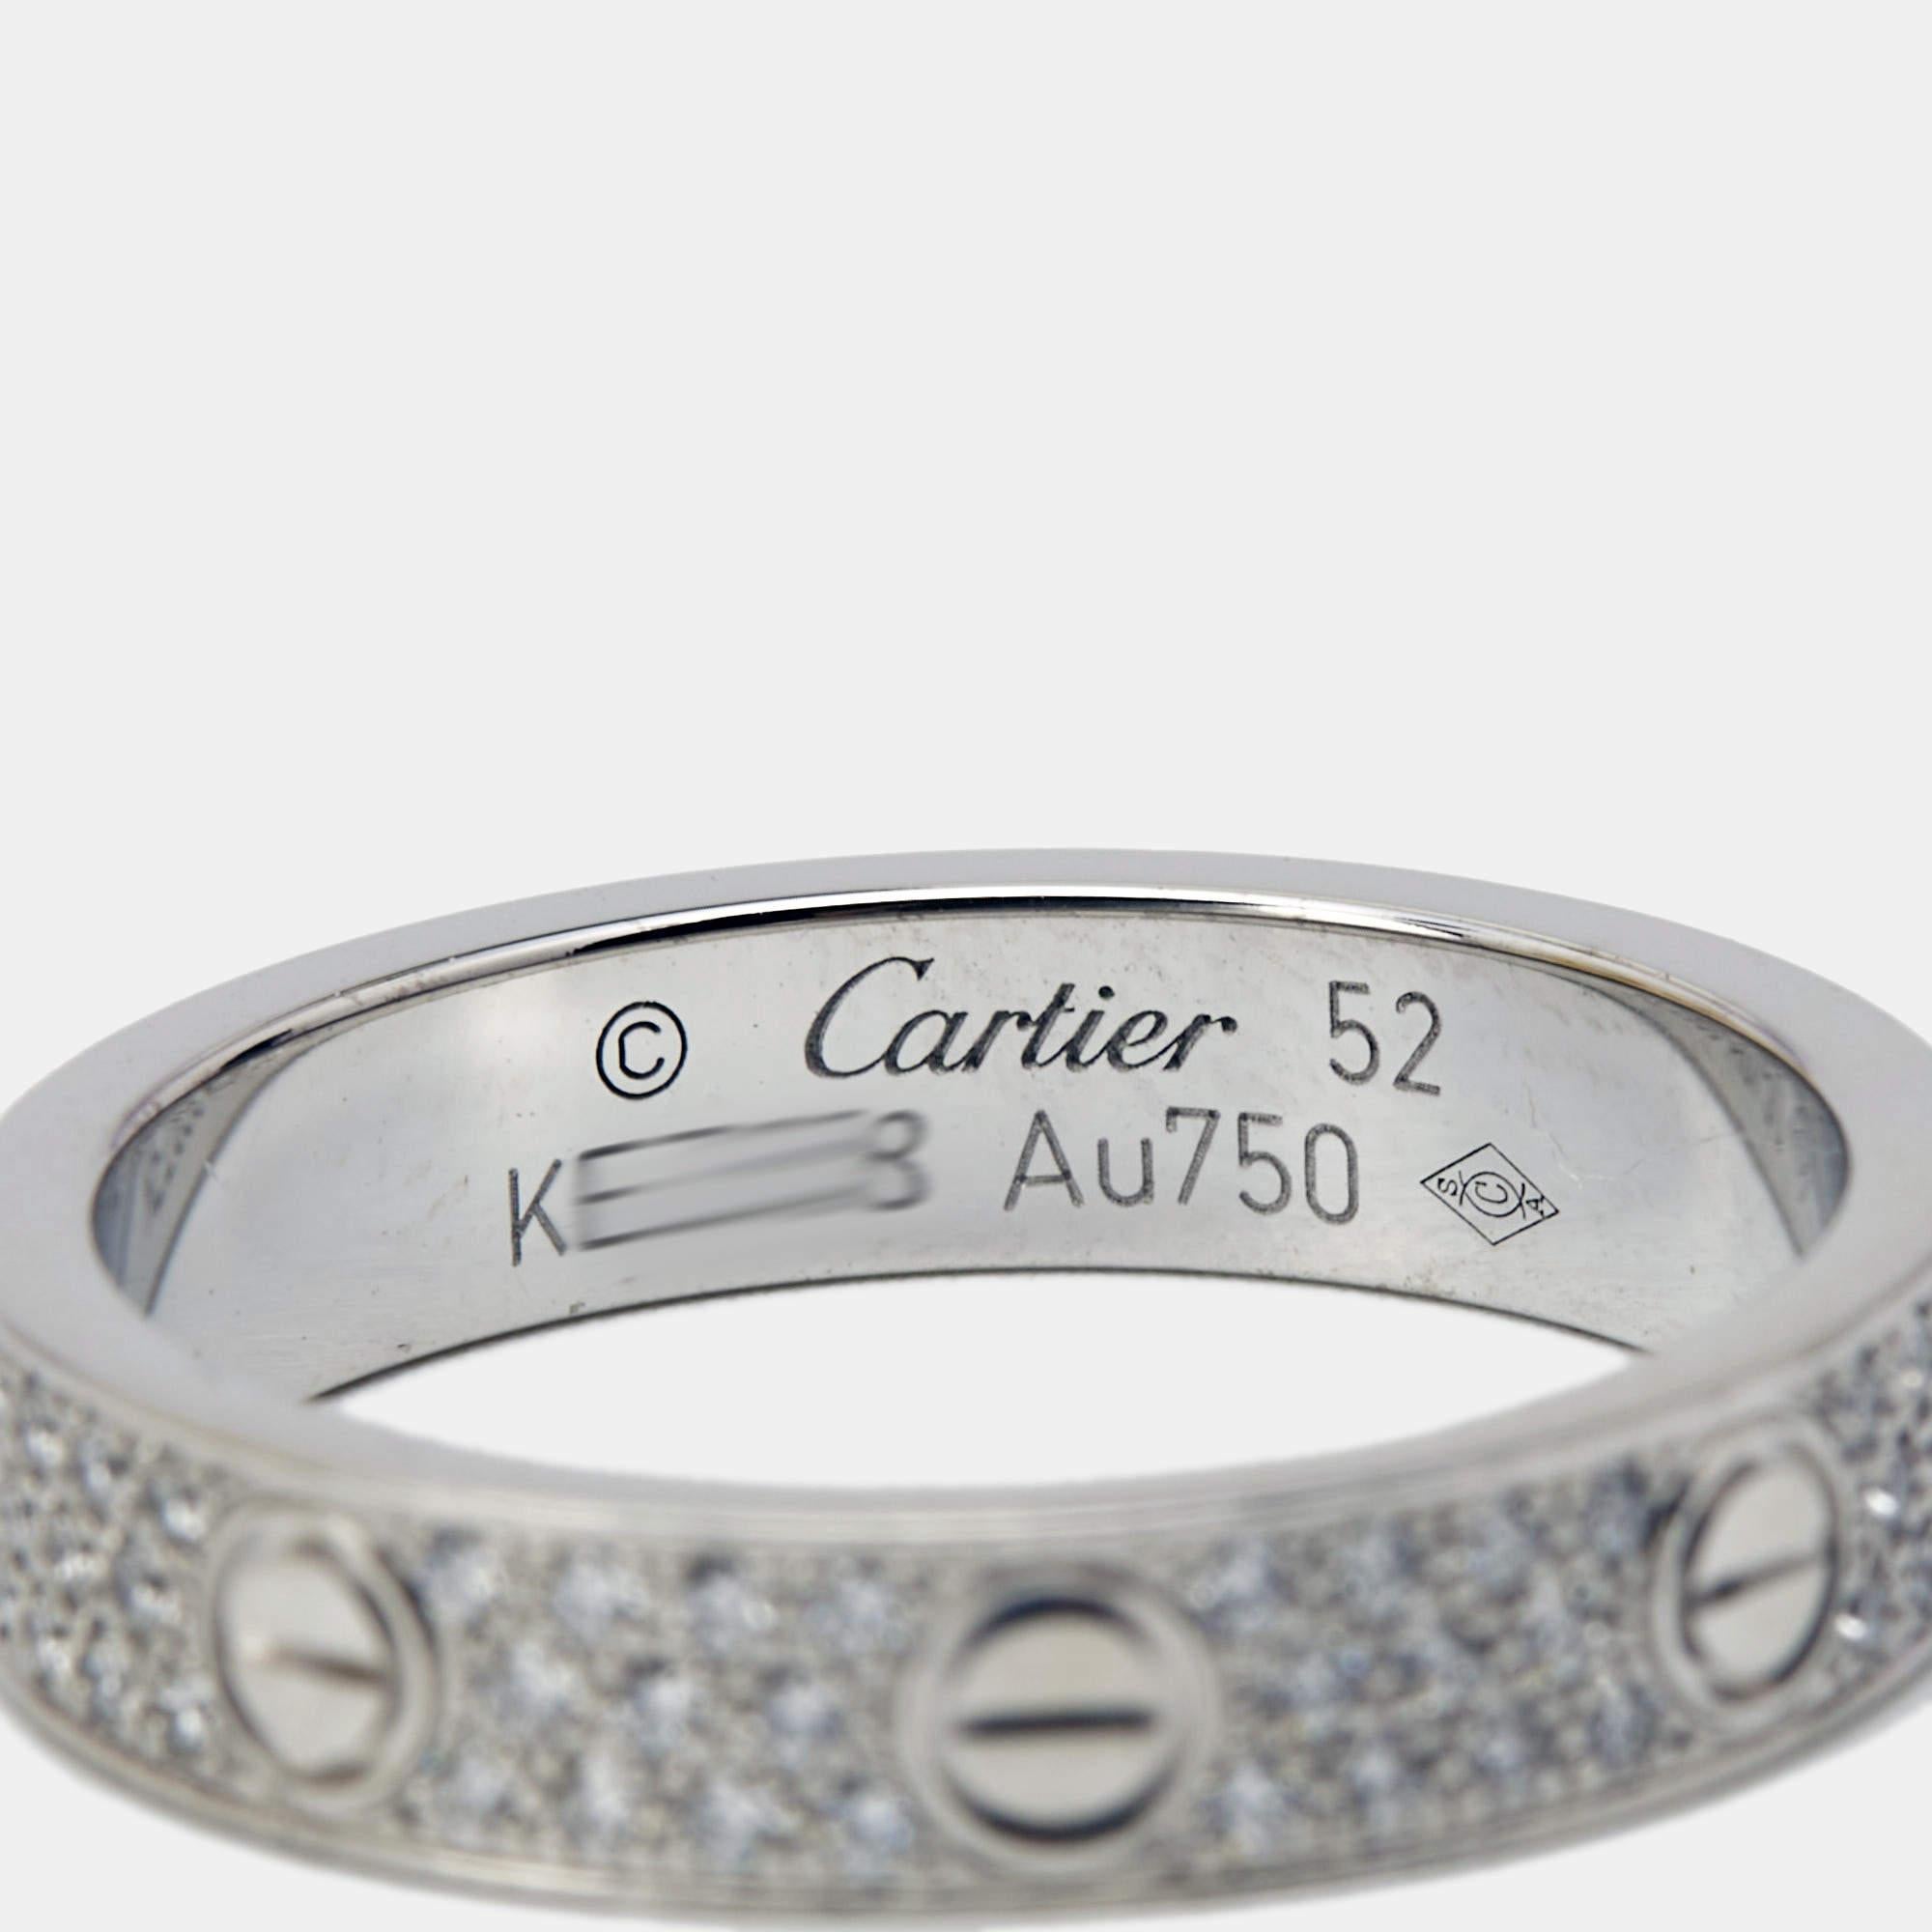 Precious stones are used to transform this Cartier Love ring into an exceptional jewel you can wear on special days. Sculpted using 18k white gold and covered in incredible diamonds, the ring is a treat to the eyes. It is also added with the iconic